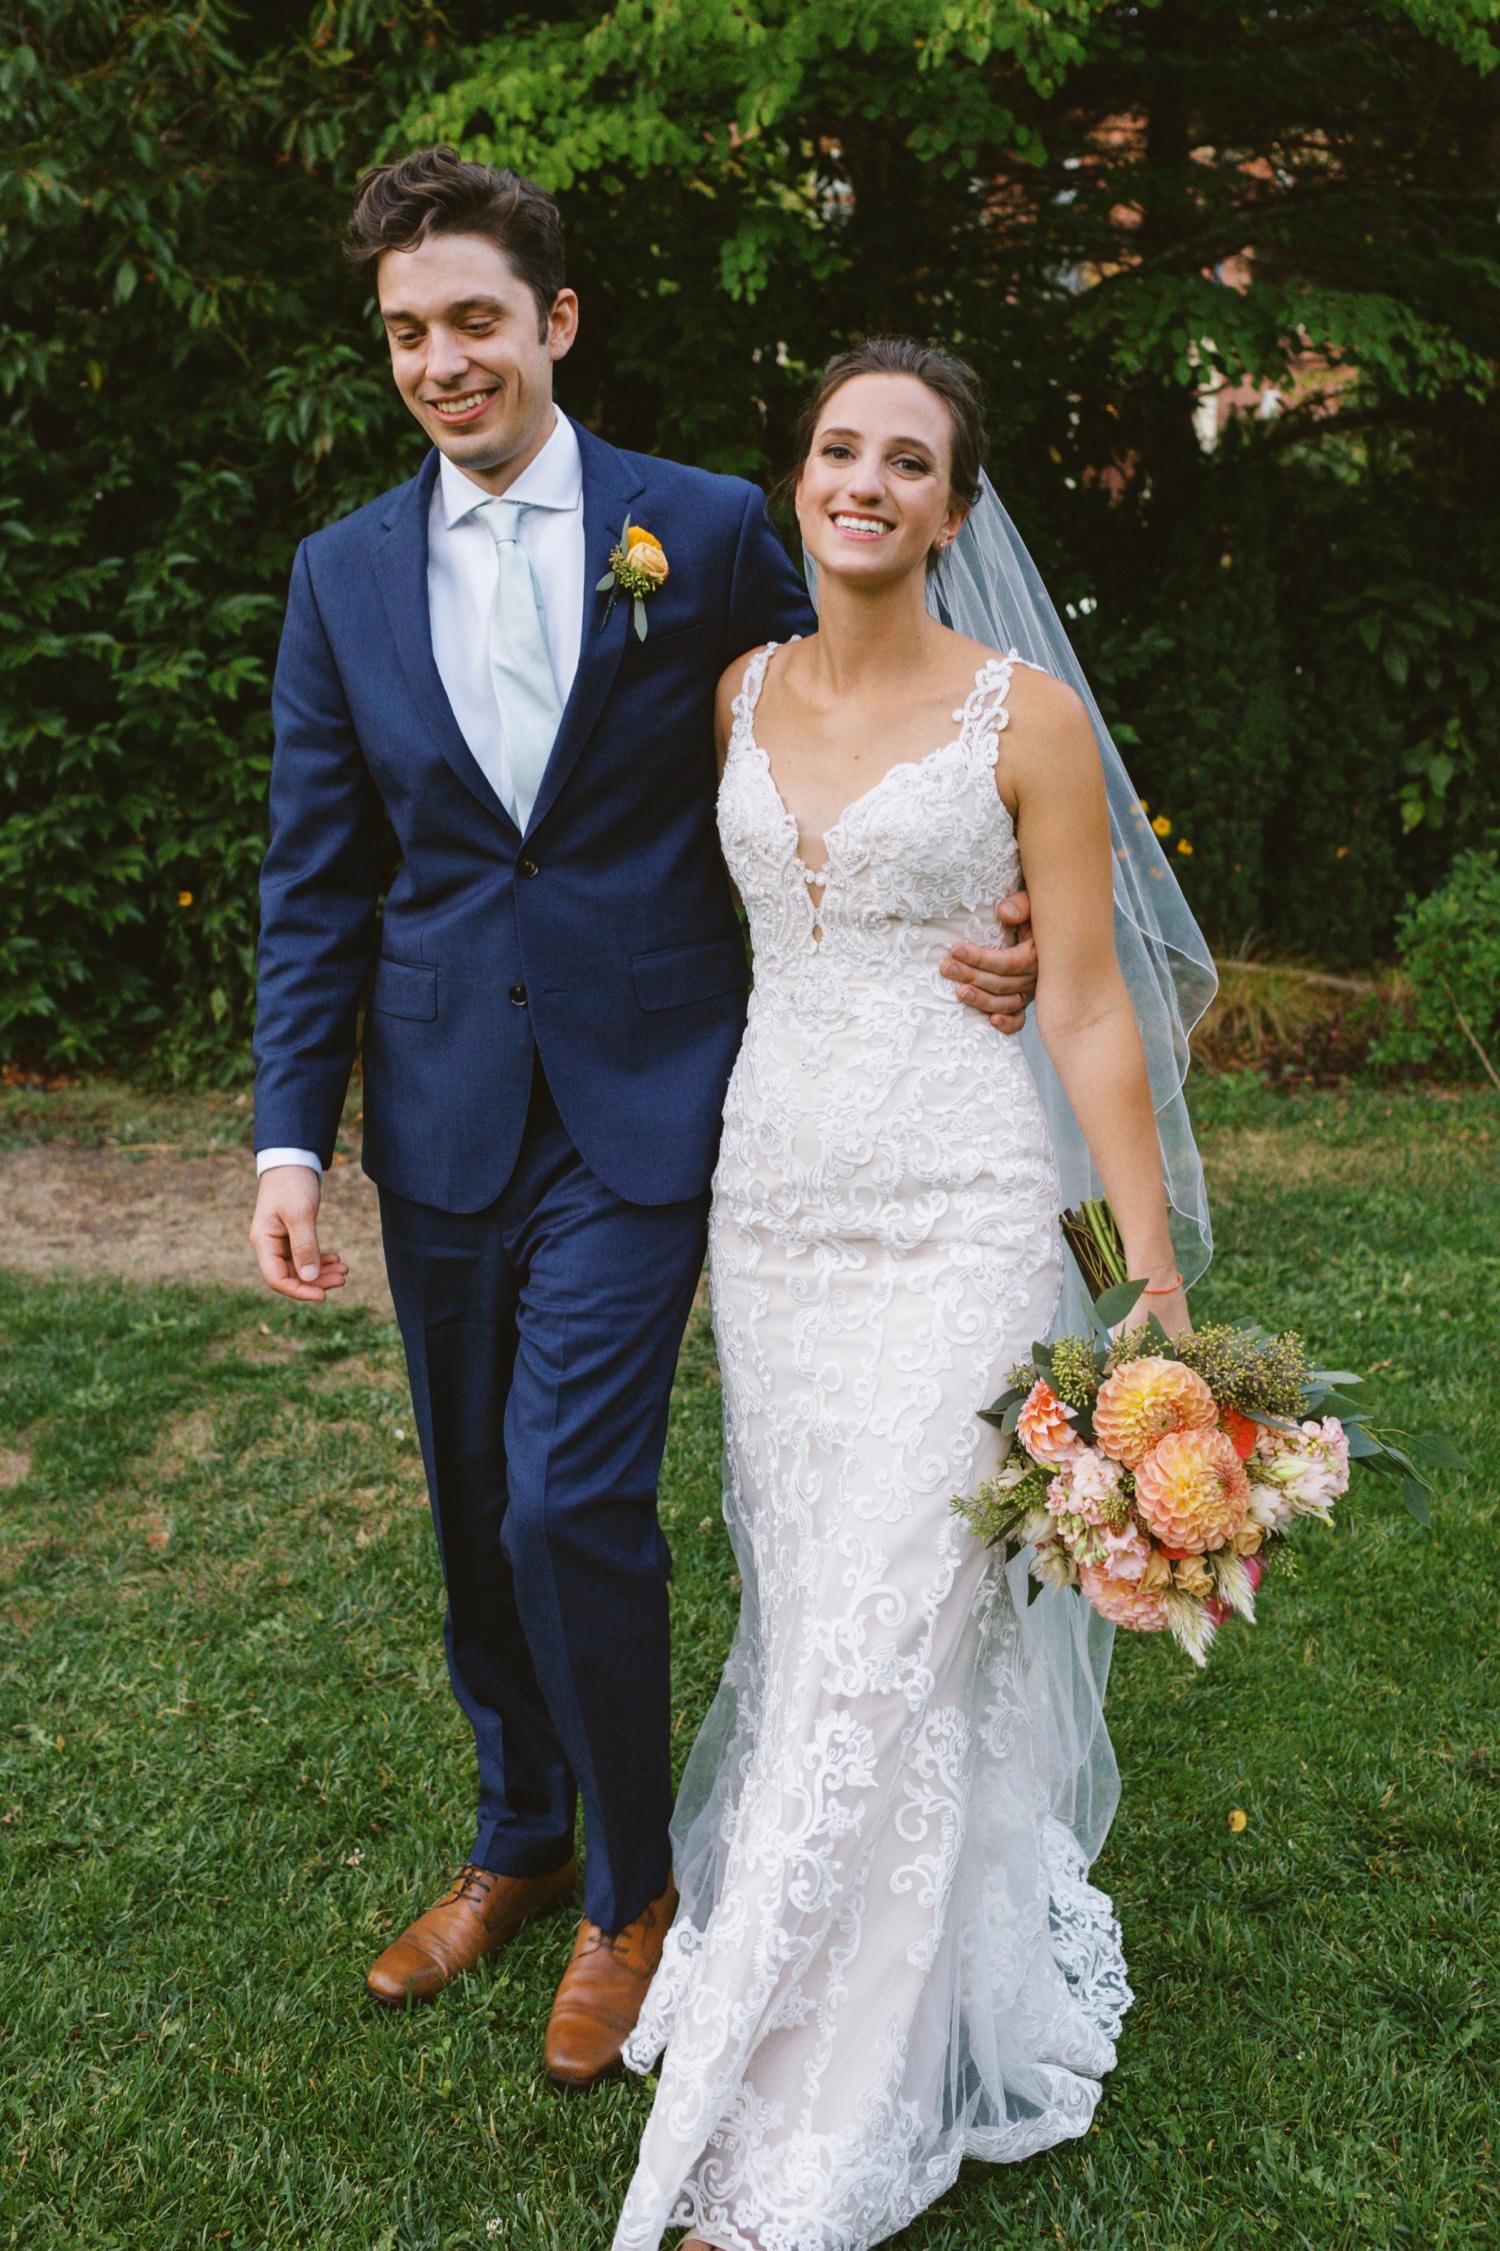  groom in navy blue suit and bride in white dress holding bouquet of pink and orange flowers walk together 